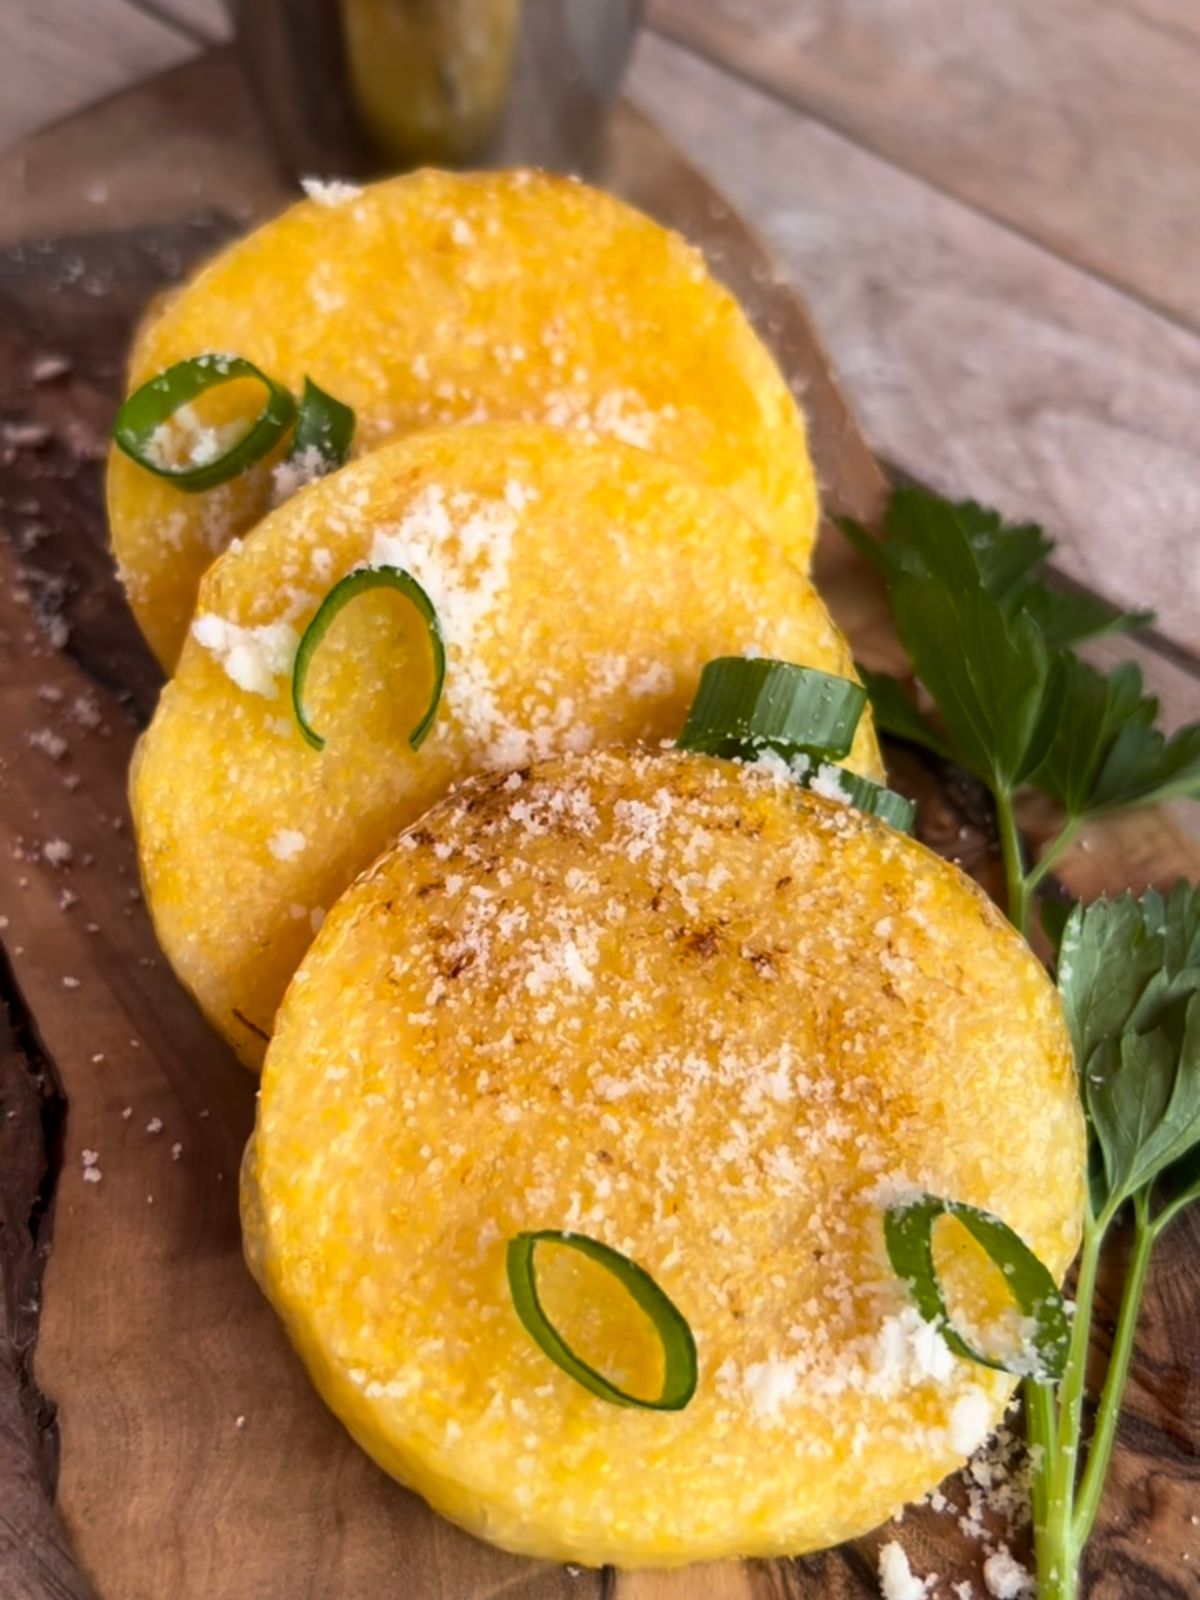 Baked polenta rounds on a cutting board with chopped chives